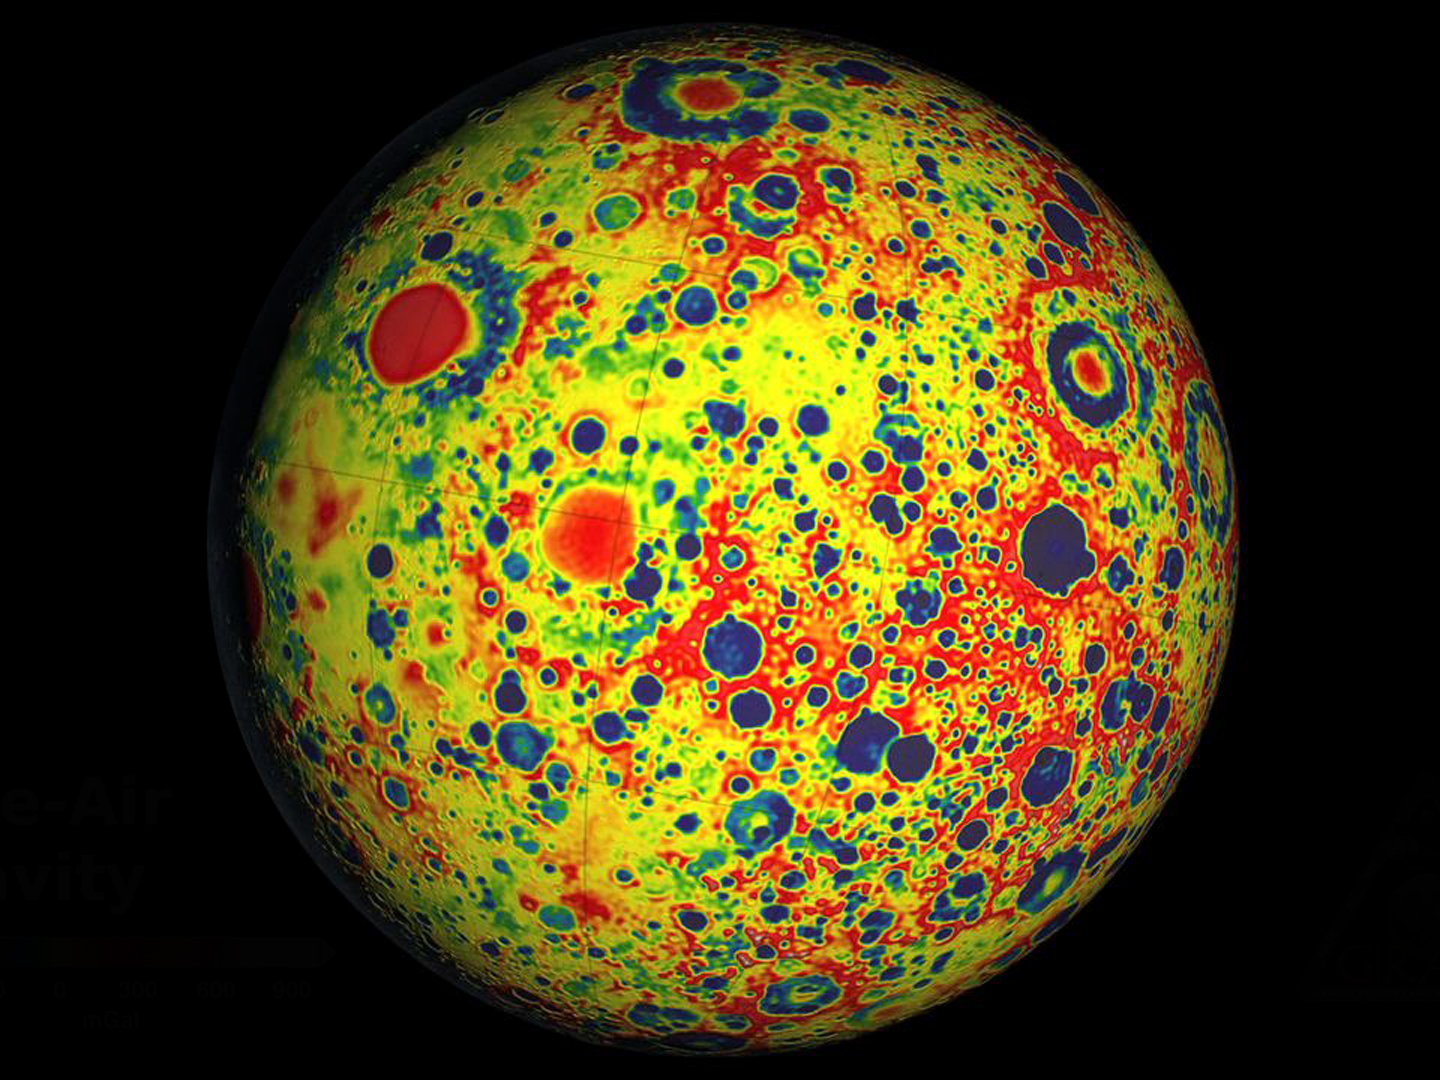 Gravity map of the moon, with variations shown in bright primary colors. The pattern resembles craters. 